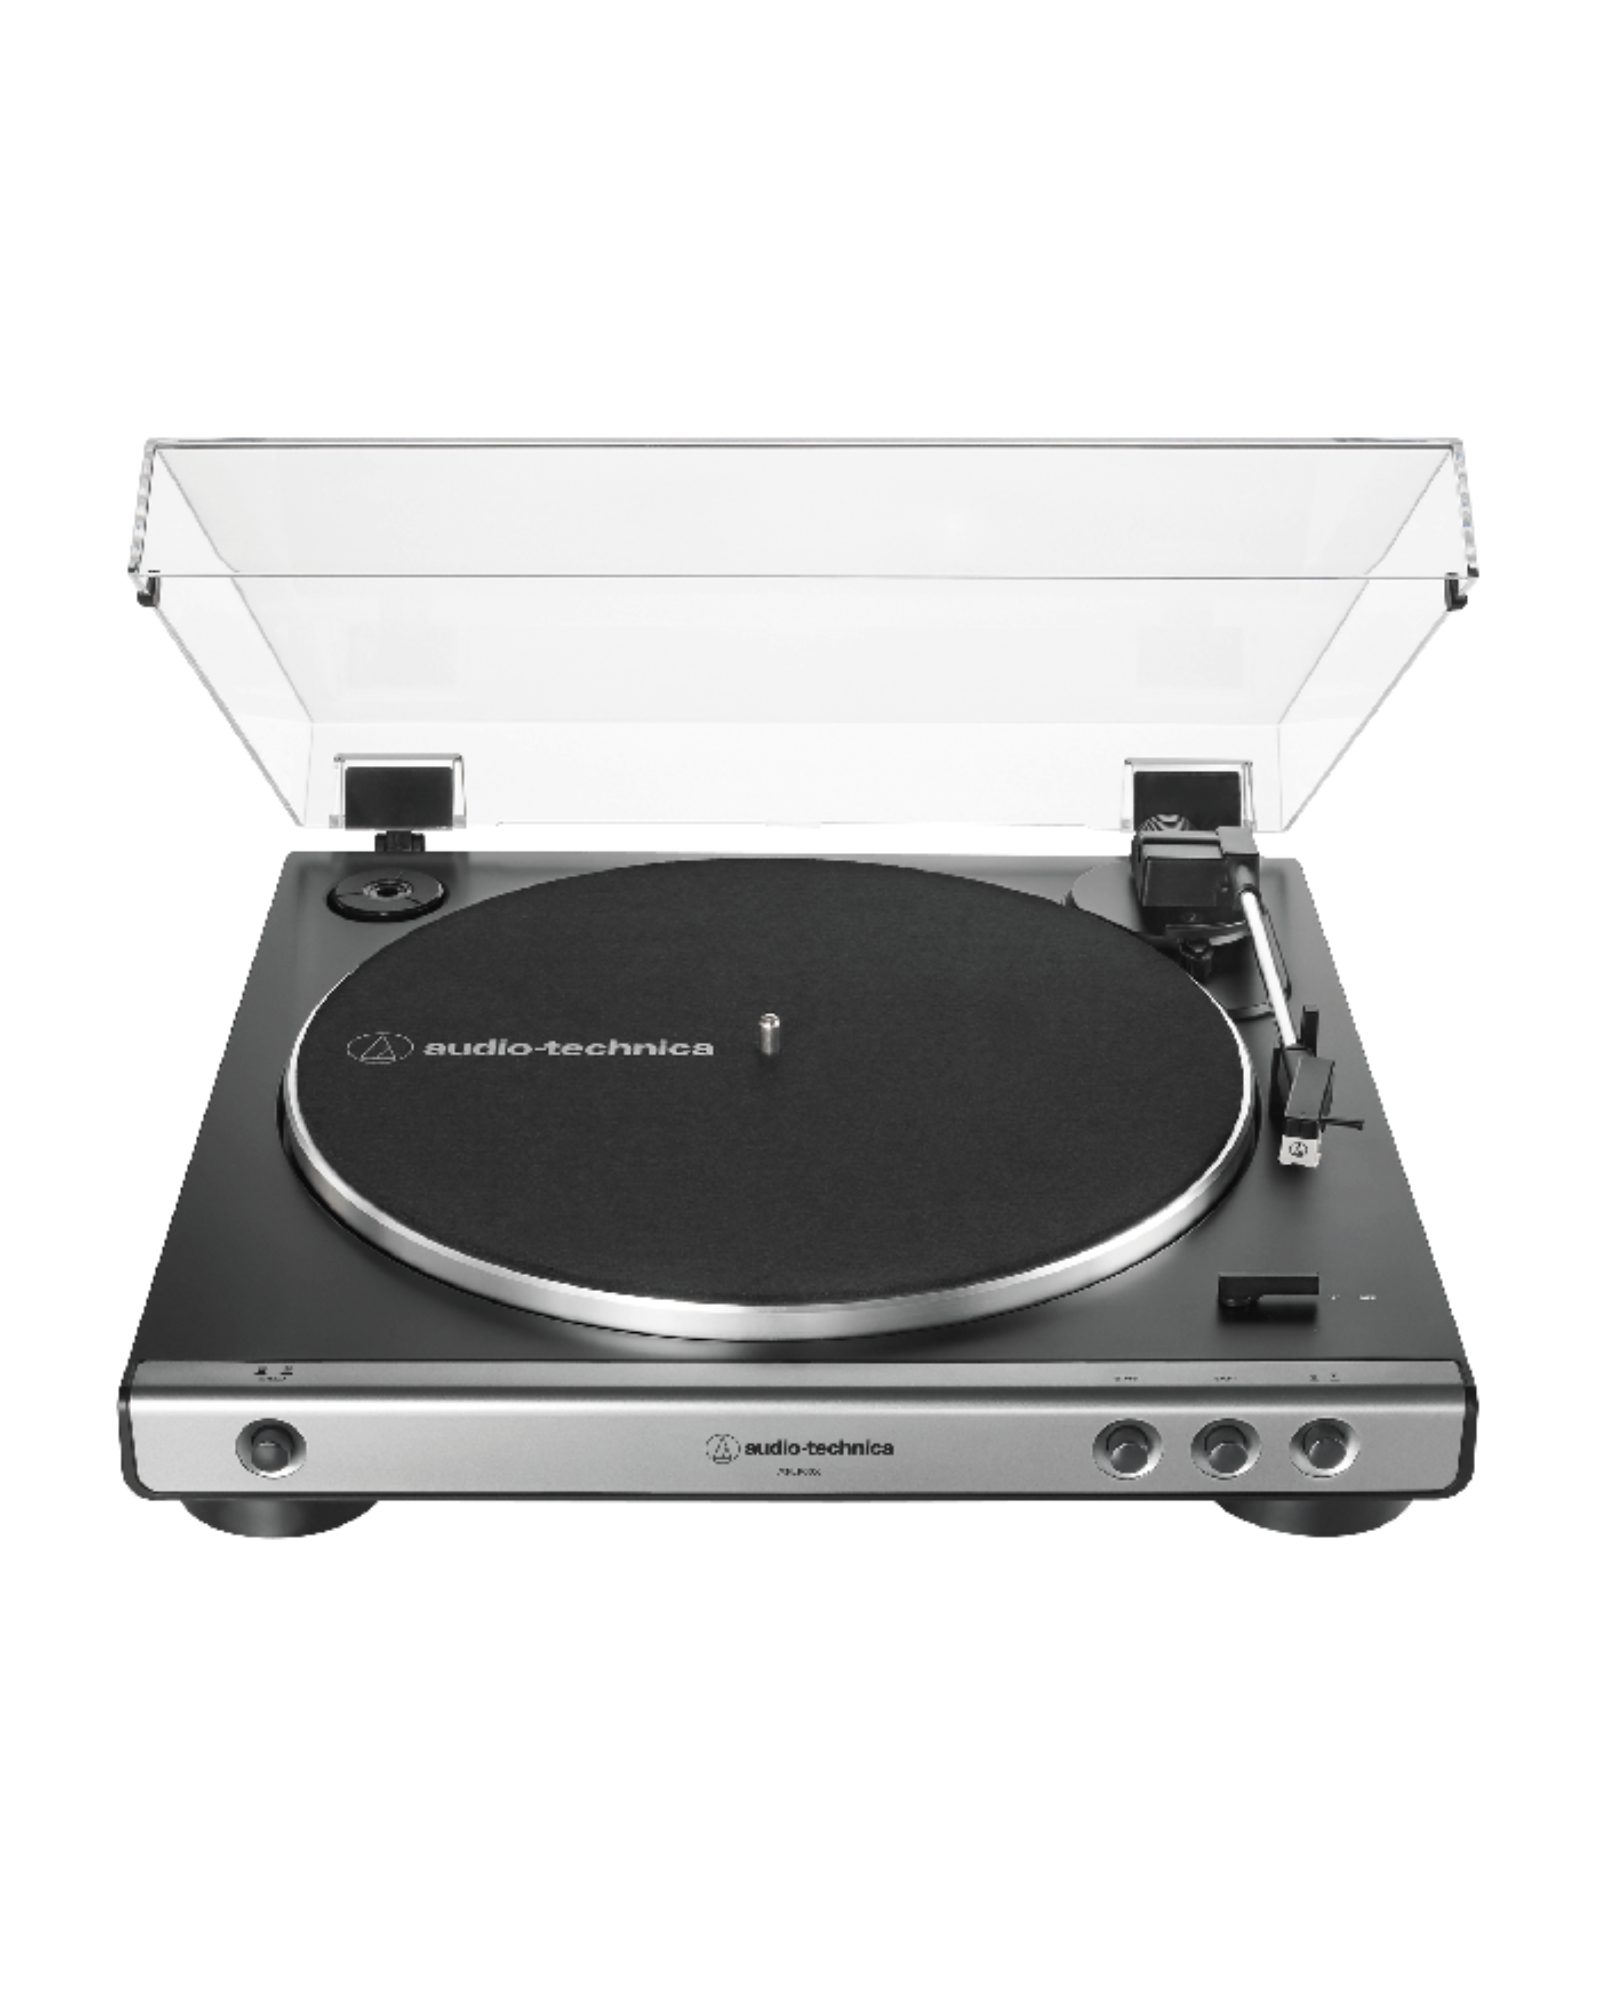 FULLY AUTOMATIC BELT-DRIVE TURNTABLE